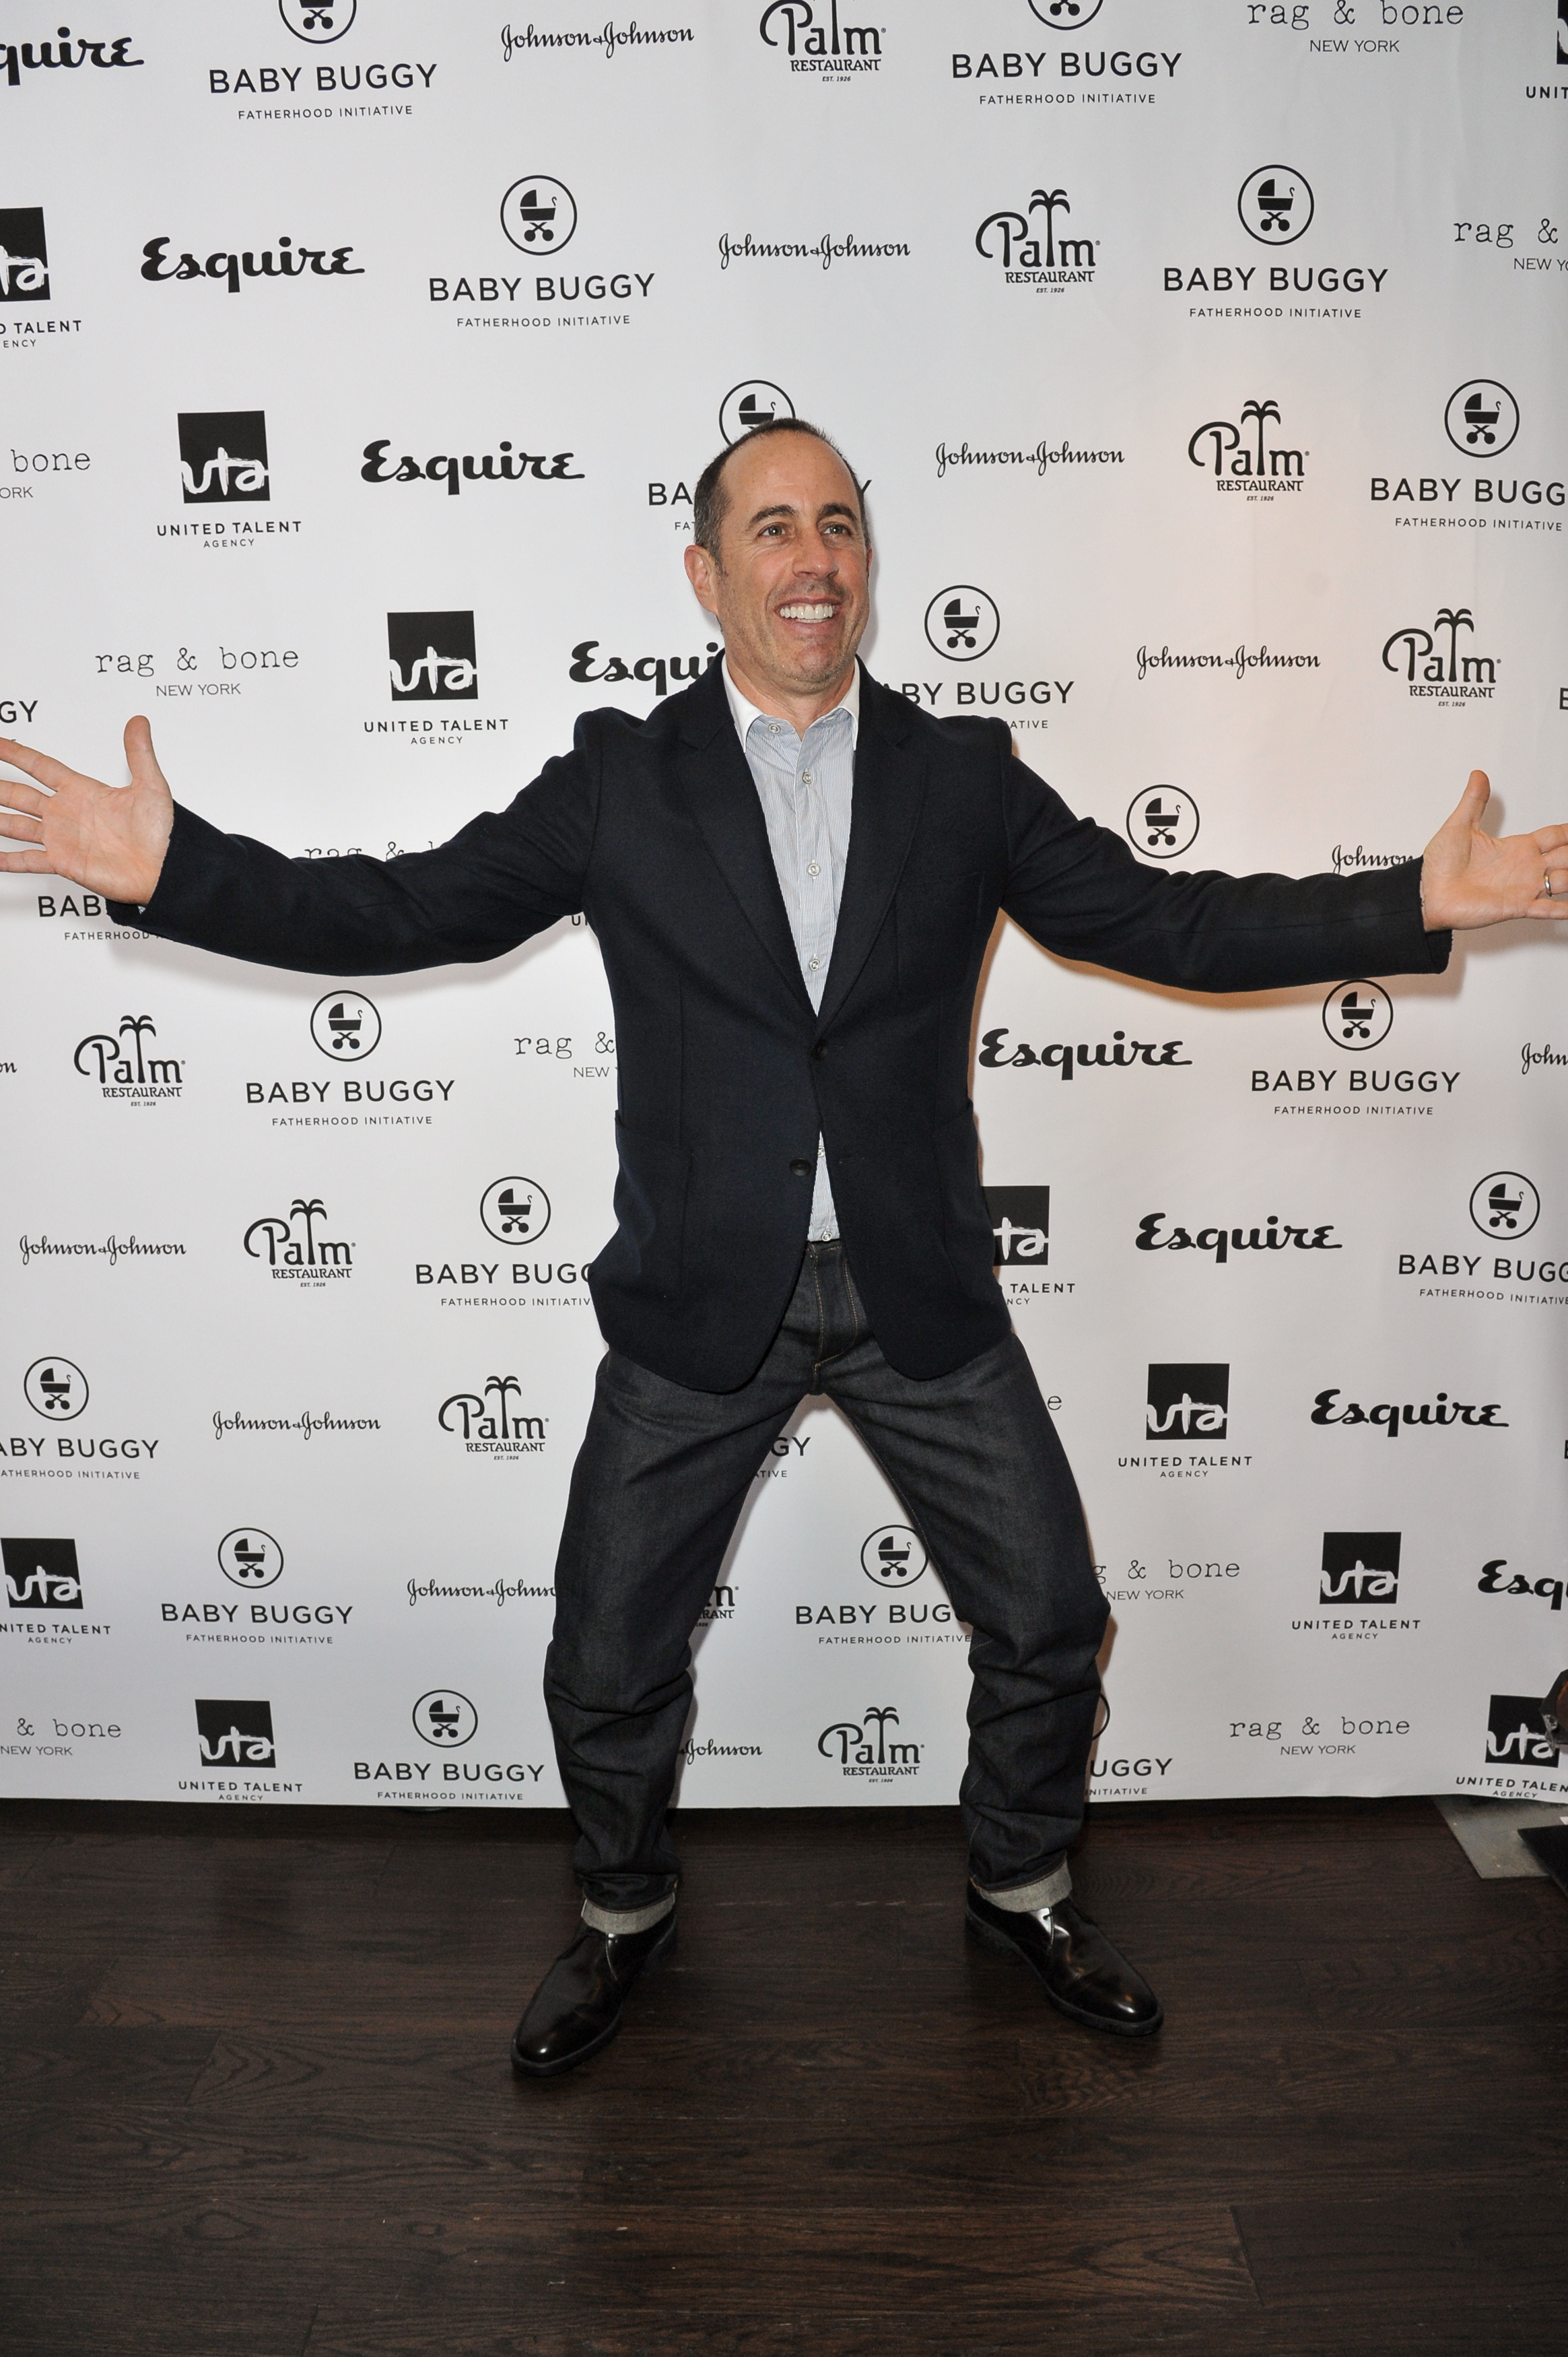 Jerry Seinfeld attends the Inaugural Los Angeles Baby Buggy Fatherhood Lunch at Palm Restaurant on Wednesday, March 4, 2015, in Beverly Hills, Calif.